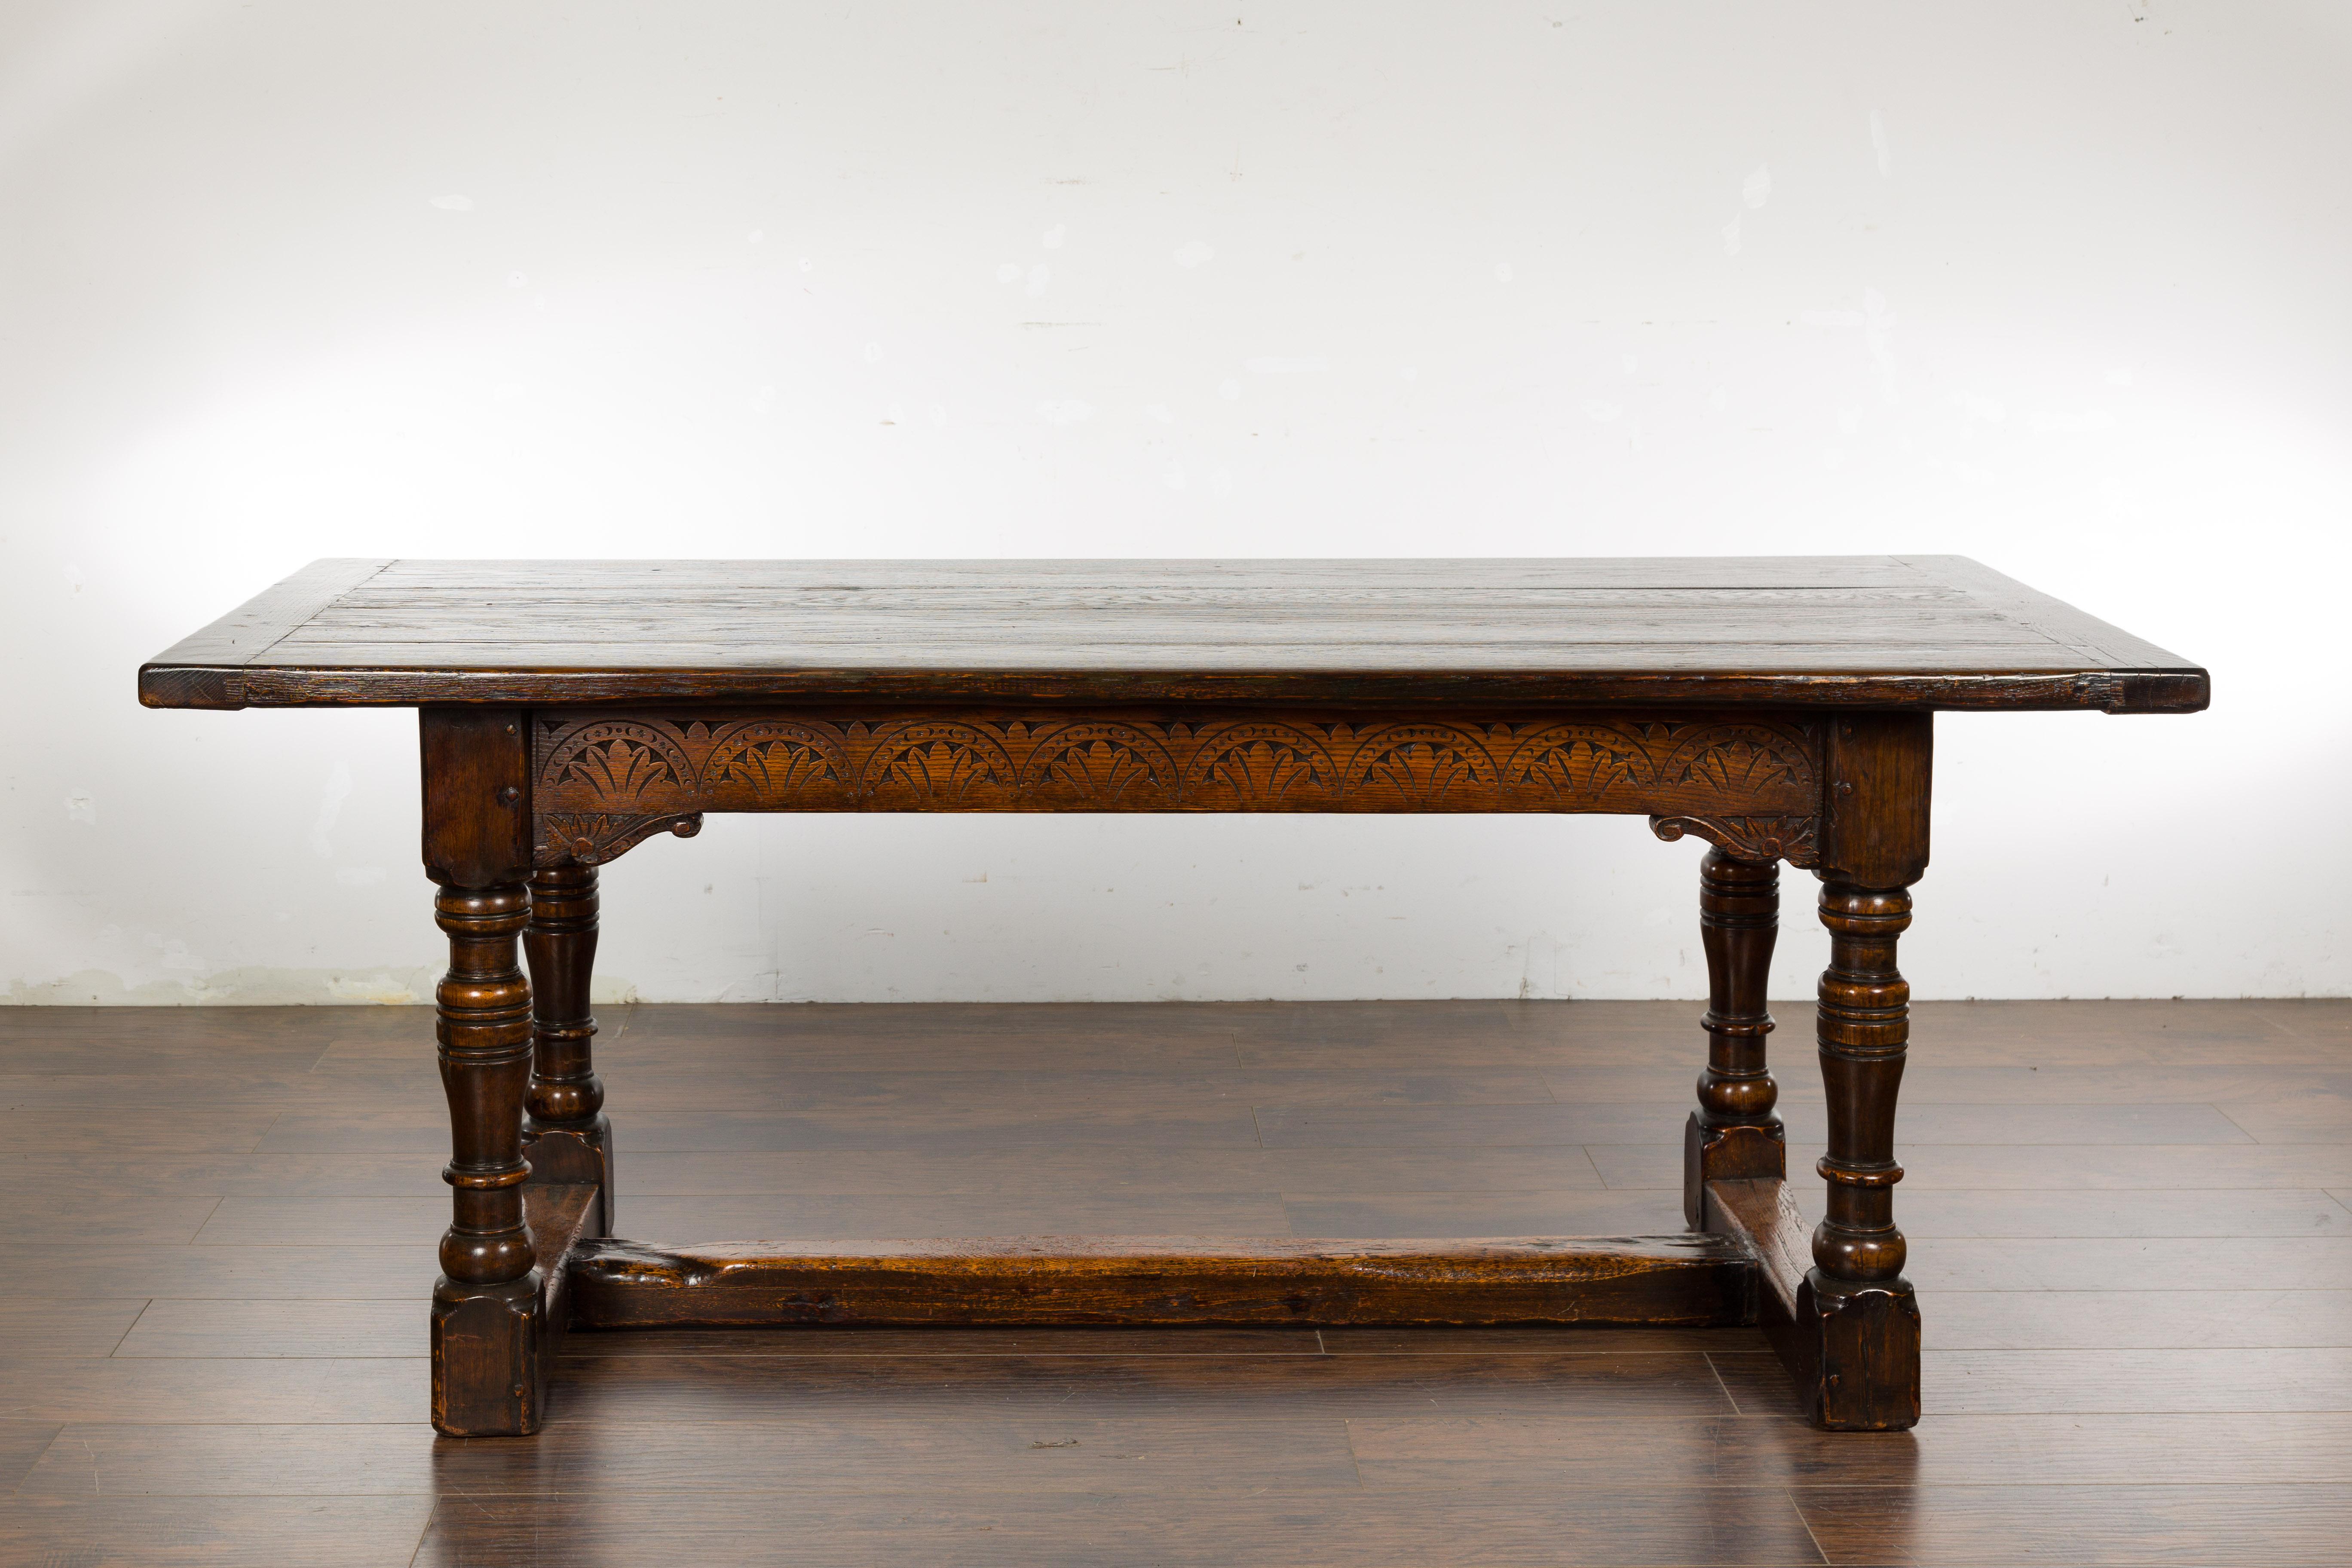 An English oak table from the 19th century with carved apron, turned legs and H-Form cross stretcher. An English oak table from the 19th century, exuding a distinct charm that captures the essence of English craftsmanship. Constructed with robust